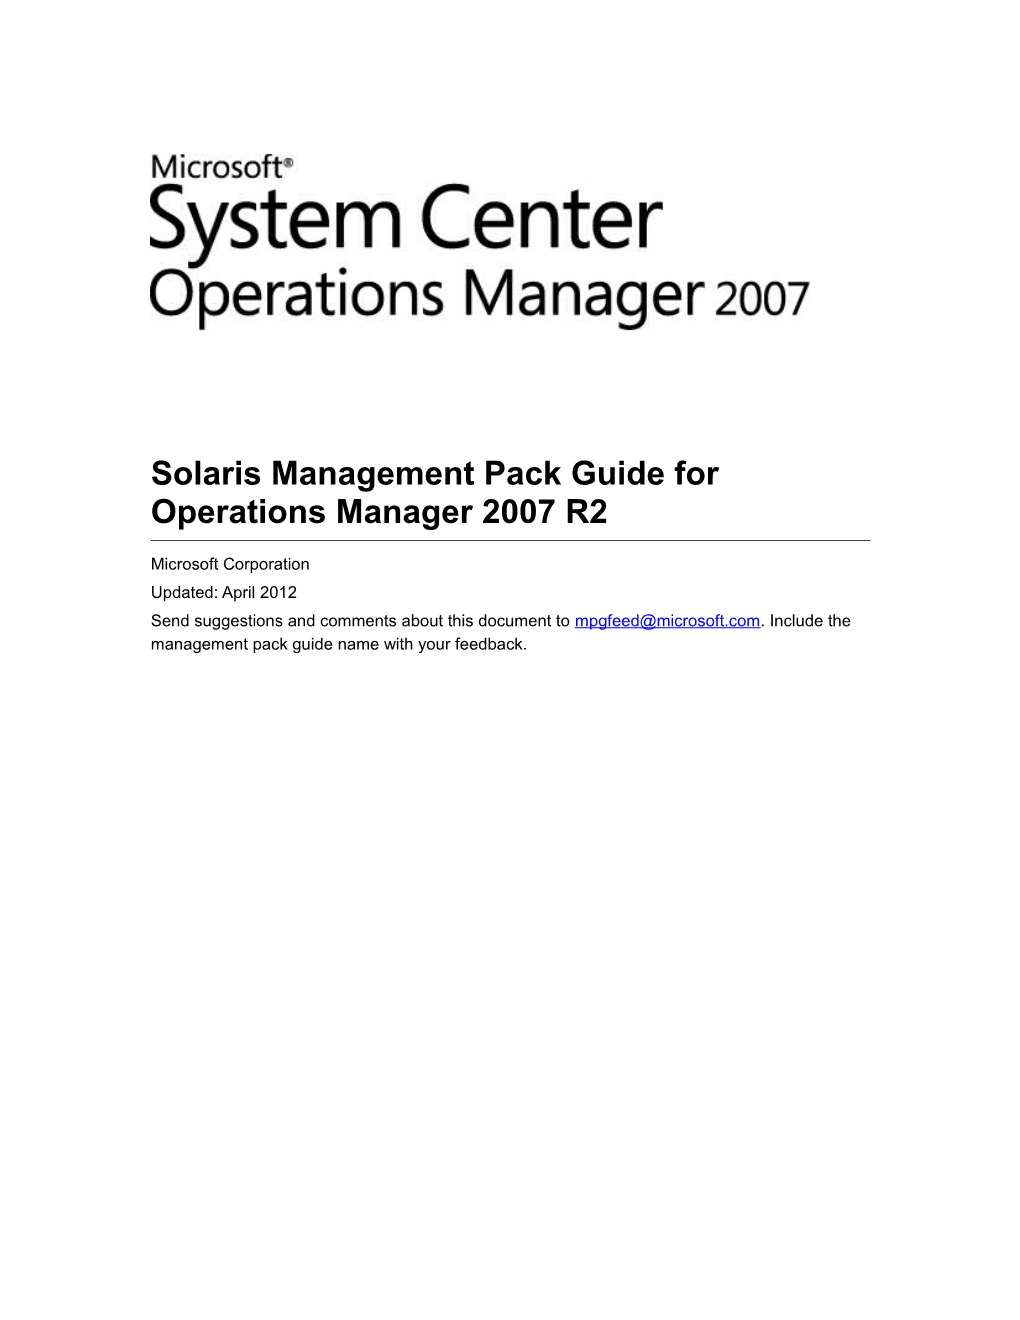 Solaris Management Pack Guide for Operations Manager 2007 R2